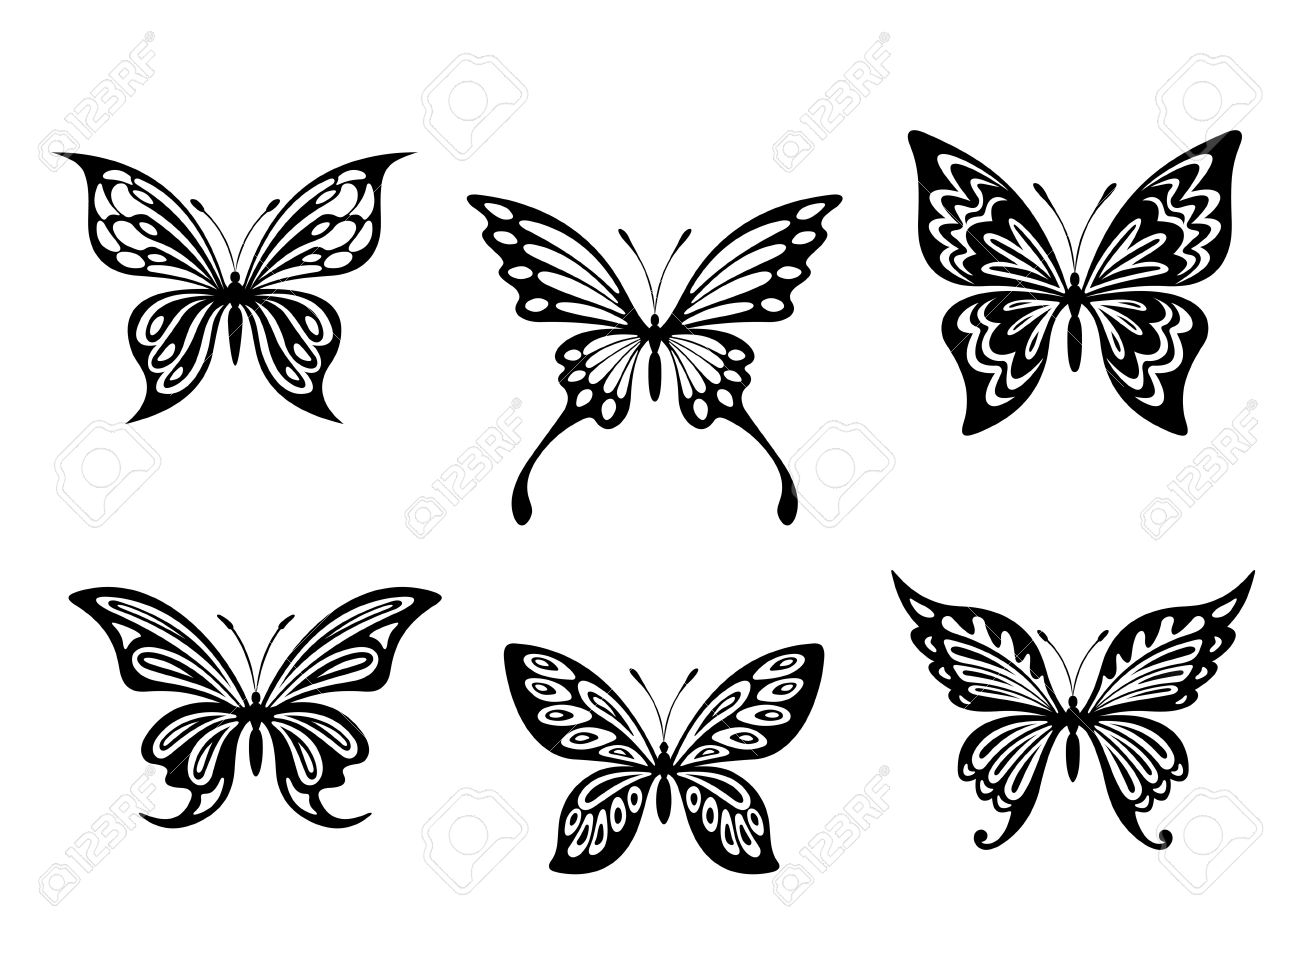 Black Butterfly Tattoos And Silhouettes Isolated On White Background with regard to sizing 1300 X 969